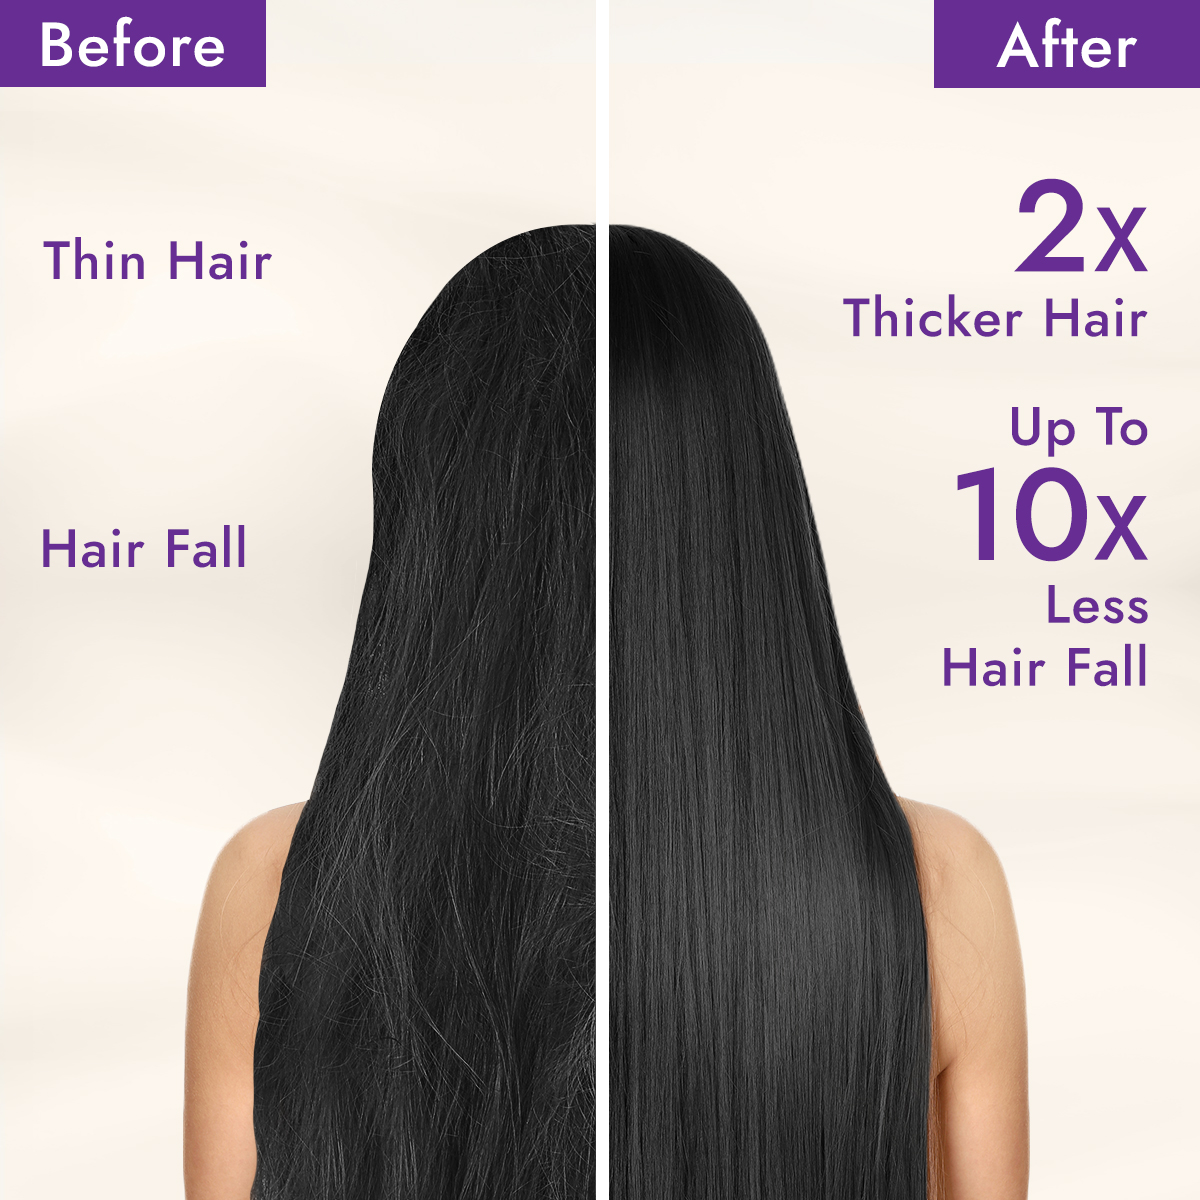 Parachute Advansed Aloevera Hair Oil - Before After Image